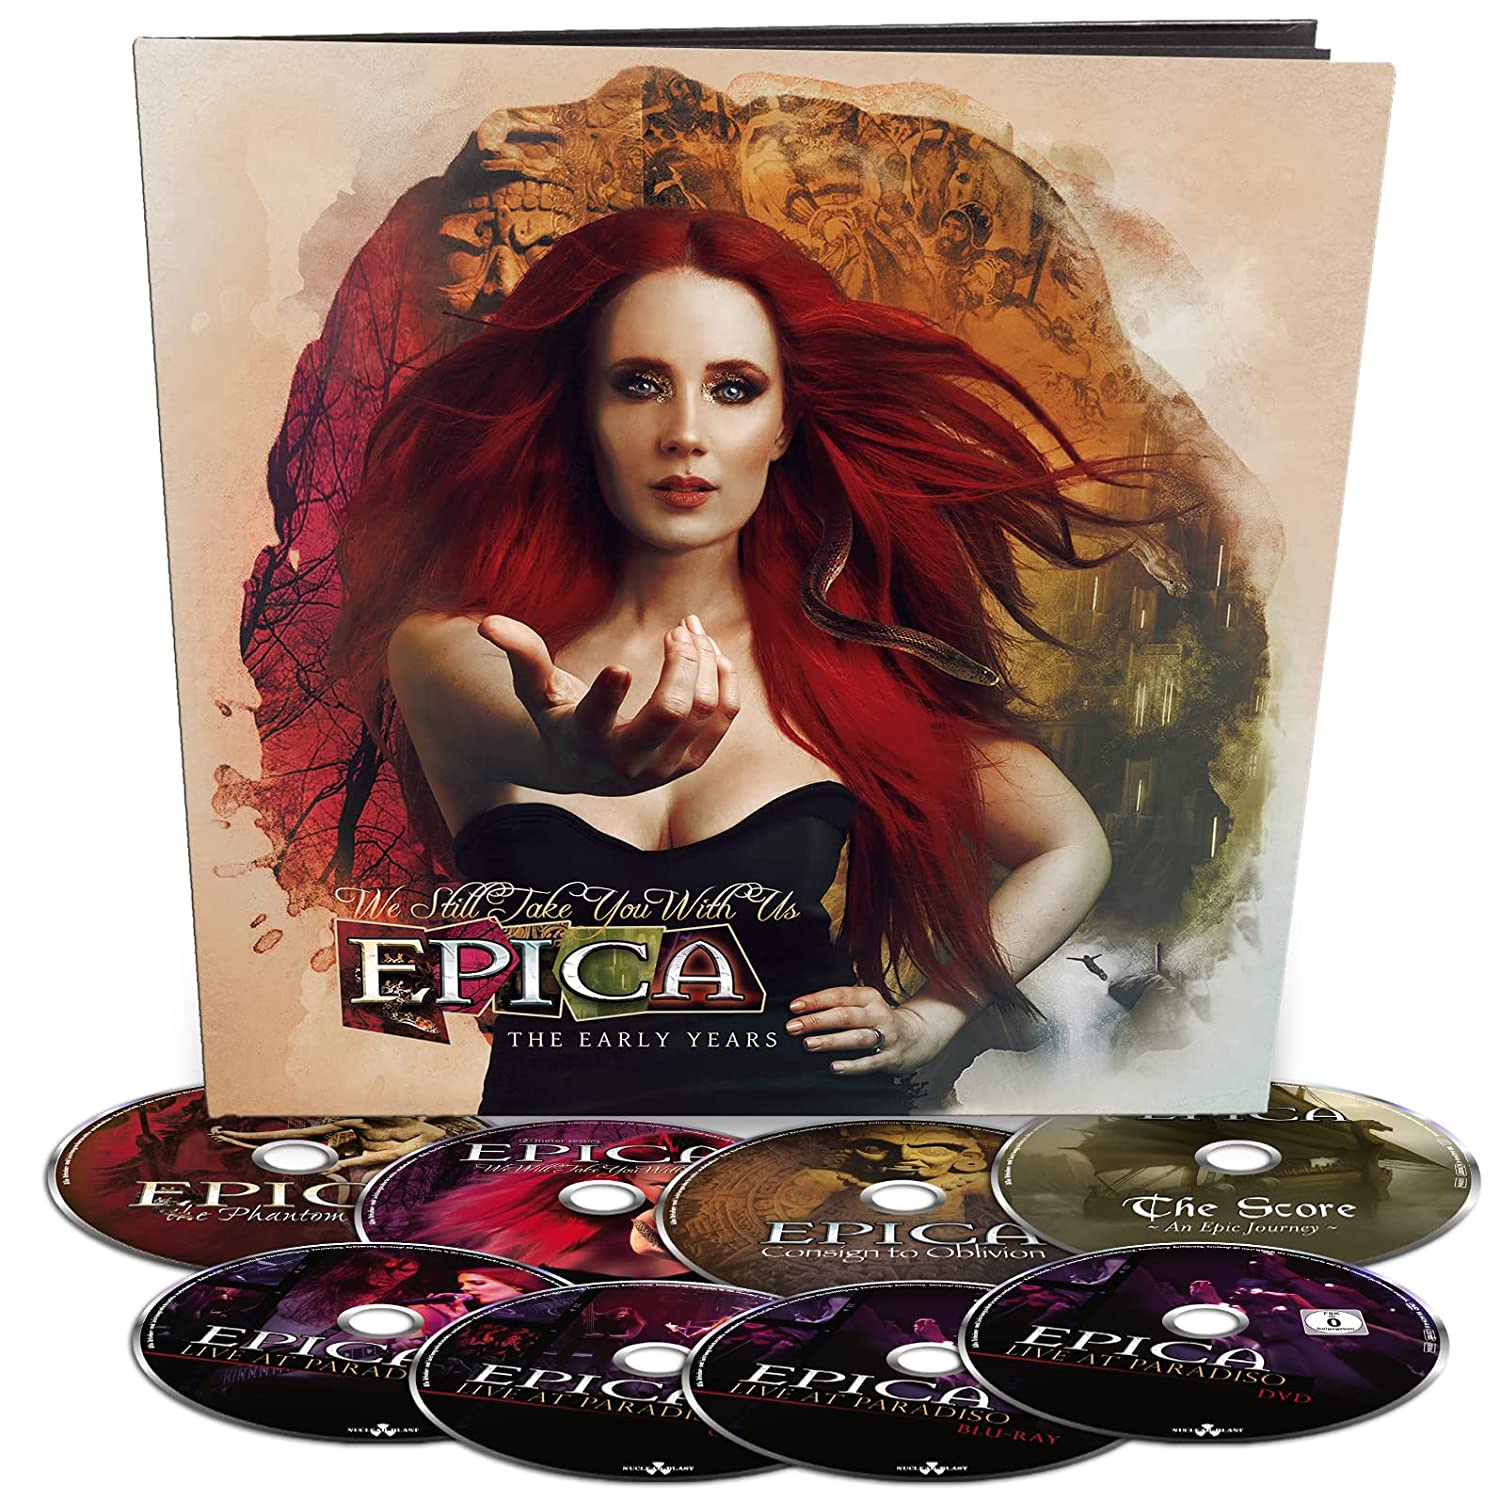 Epica We Still Take You With Us The Early Years Limited Earbook 6CD+DVD+Blu-Ray [Importado]